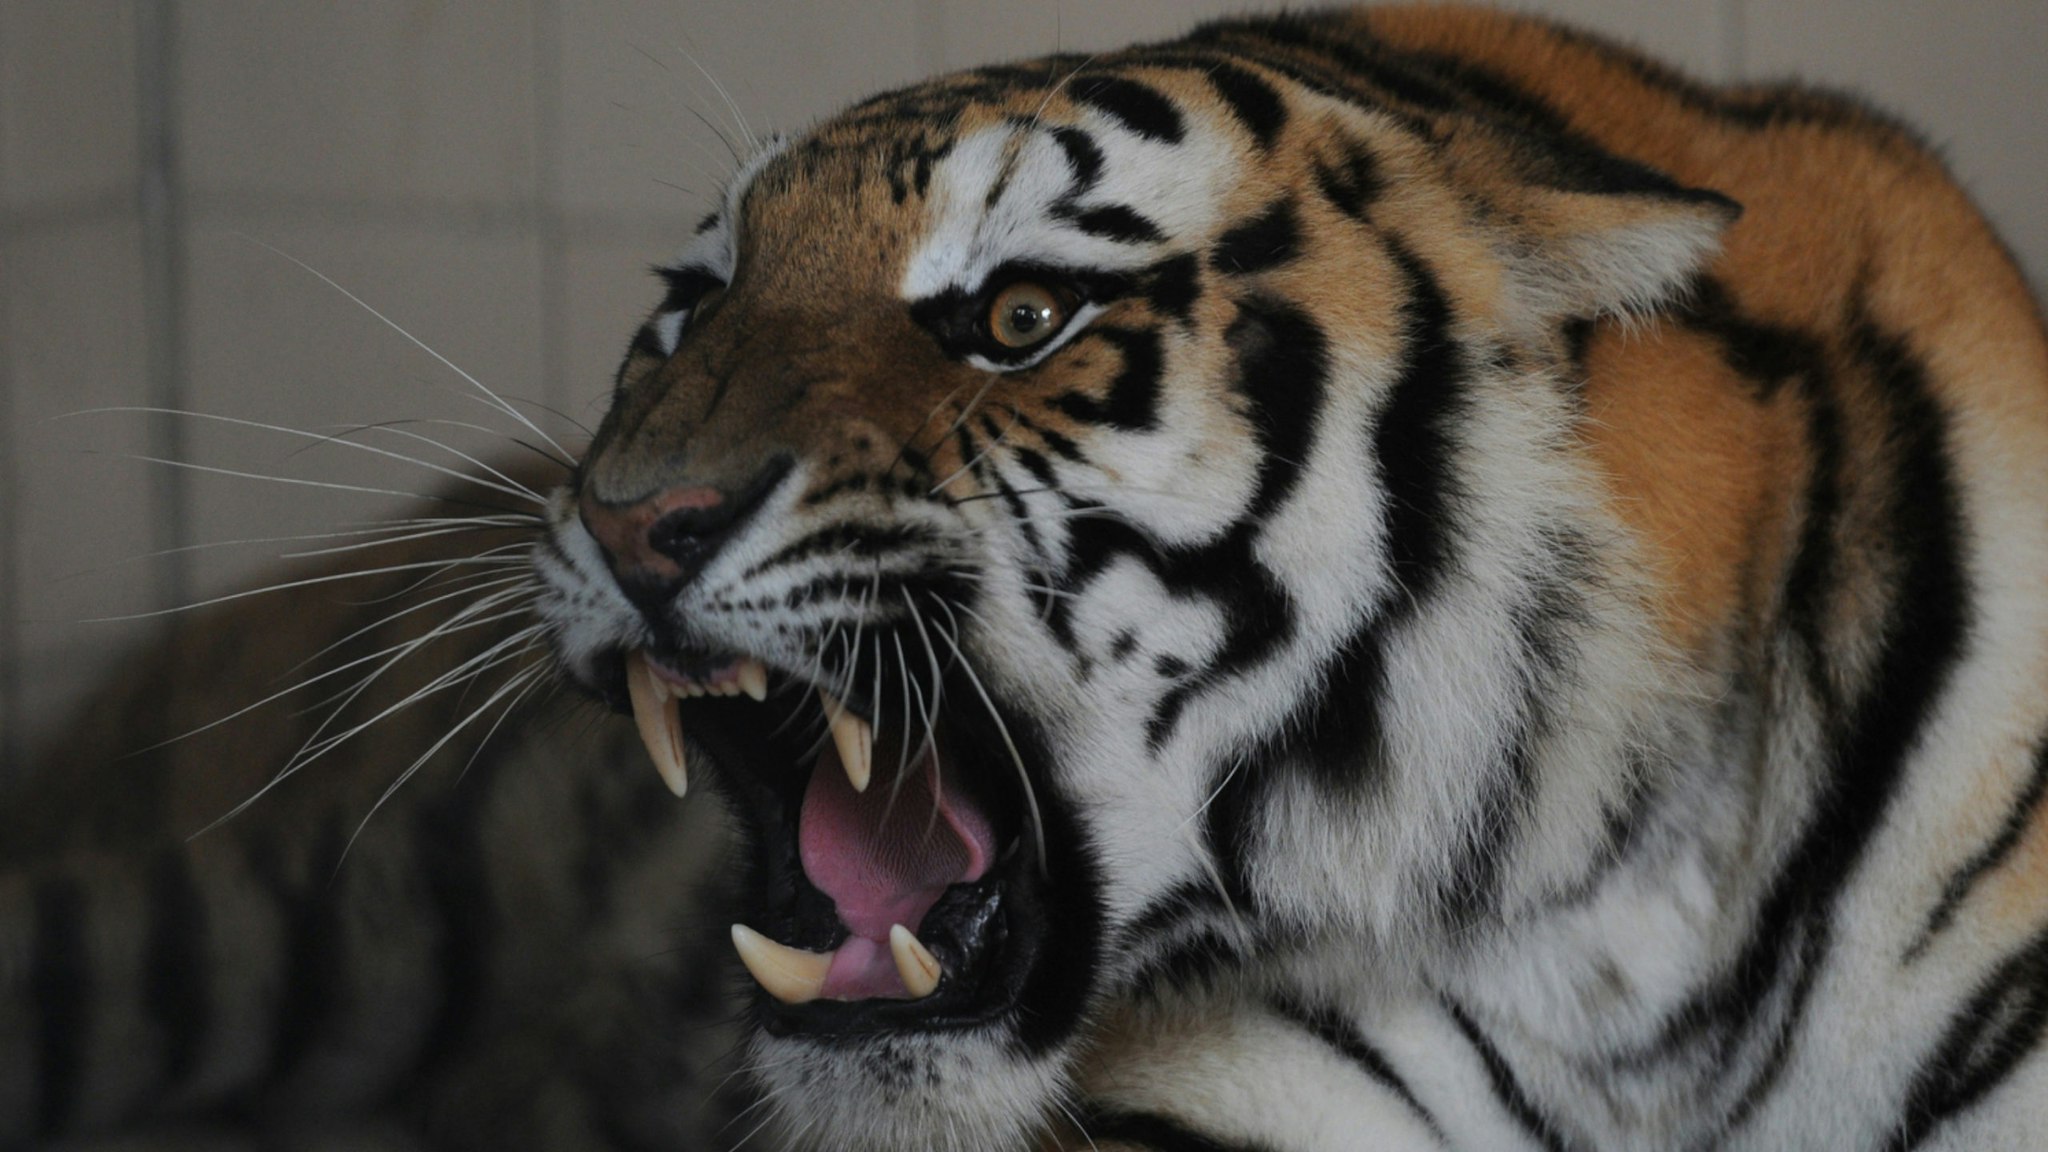 A Bengal tiger, newly arrived in Pakistan from Belgium, roars inside a cage in the municipal zoo in Karachi on July 17, 2012.